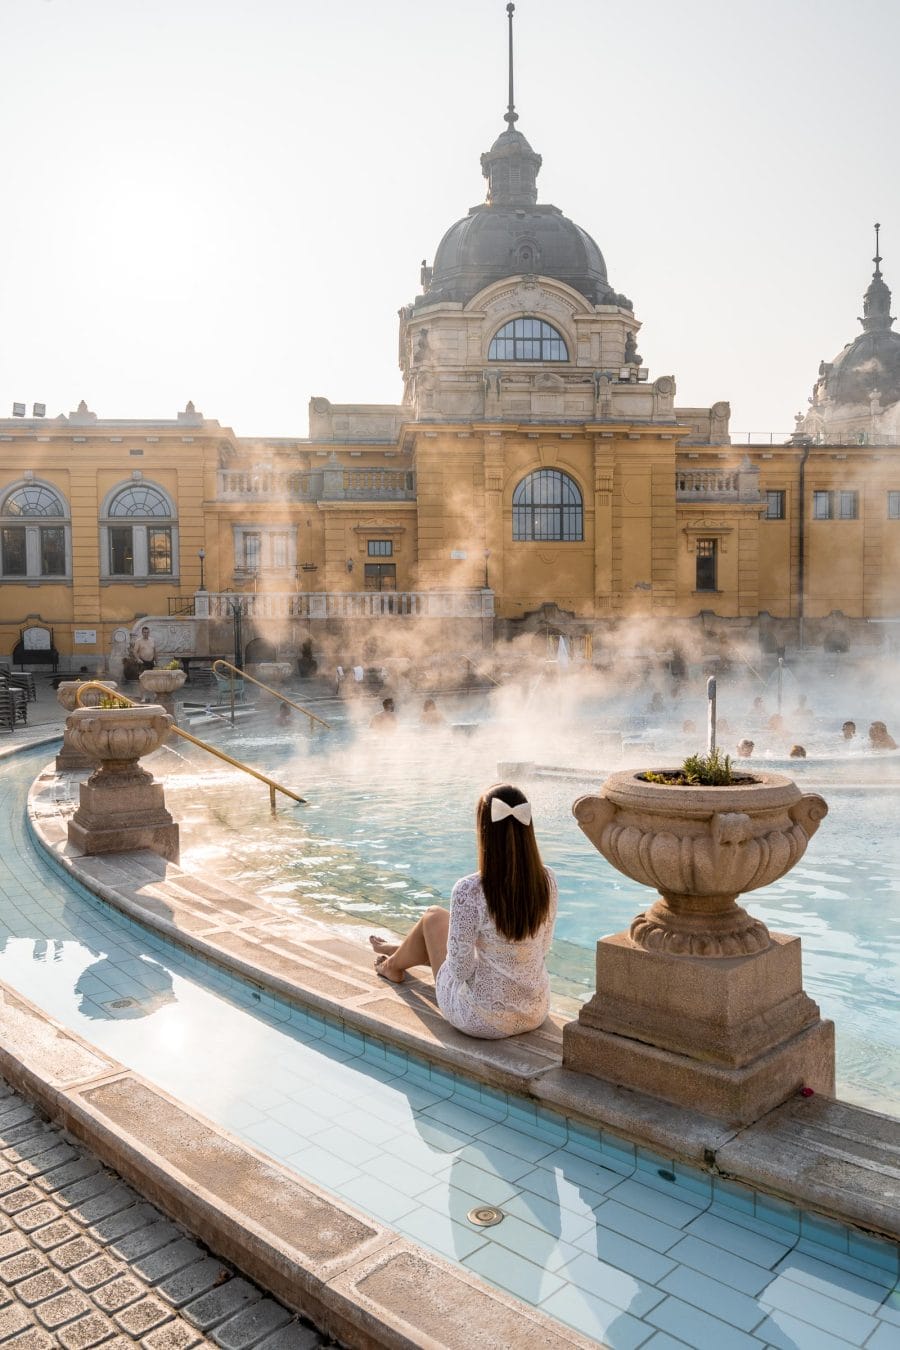 Girl in a white dress sitting at the edge of the pool in the Szechenyi Thermal Bath in Budapest